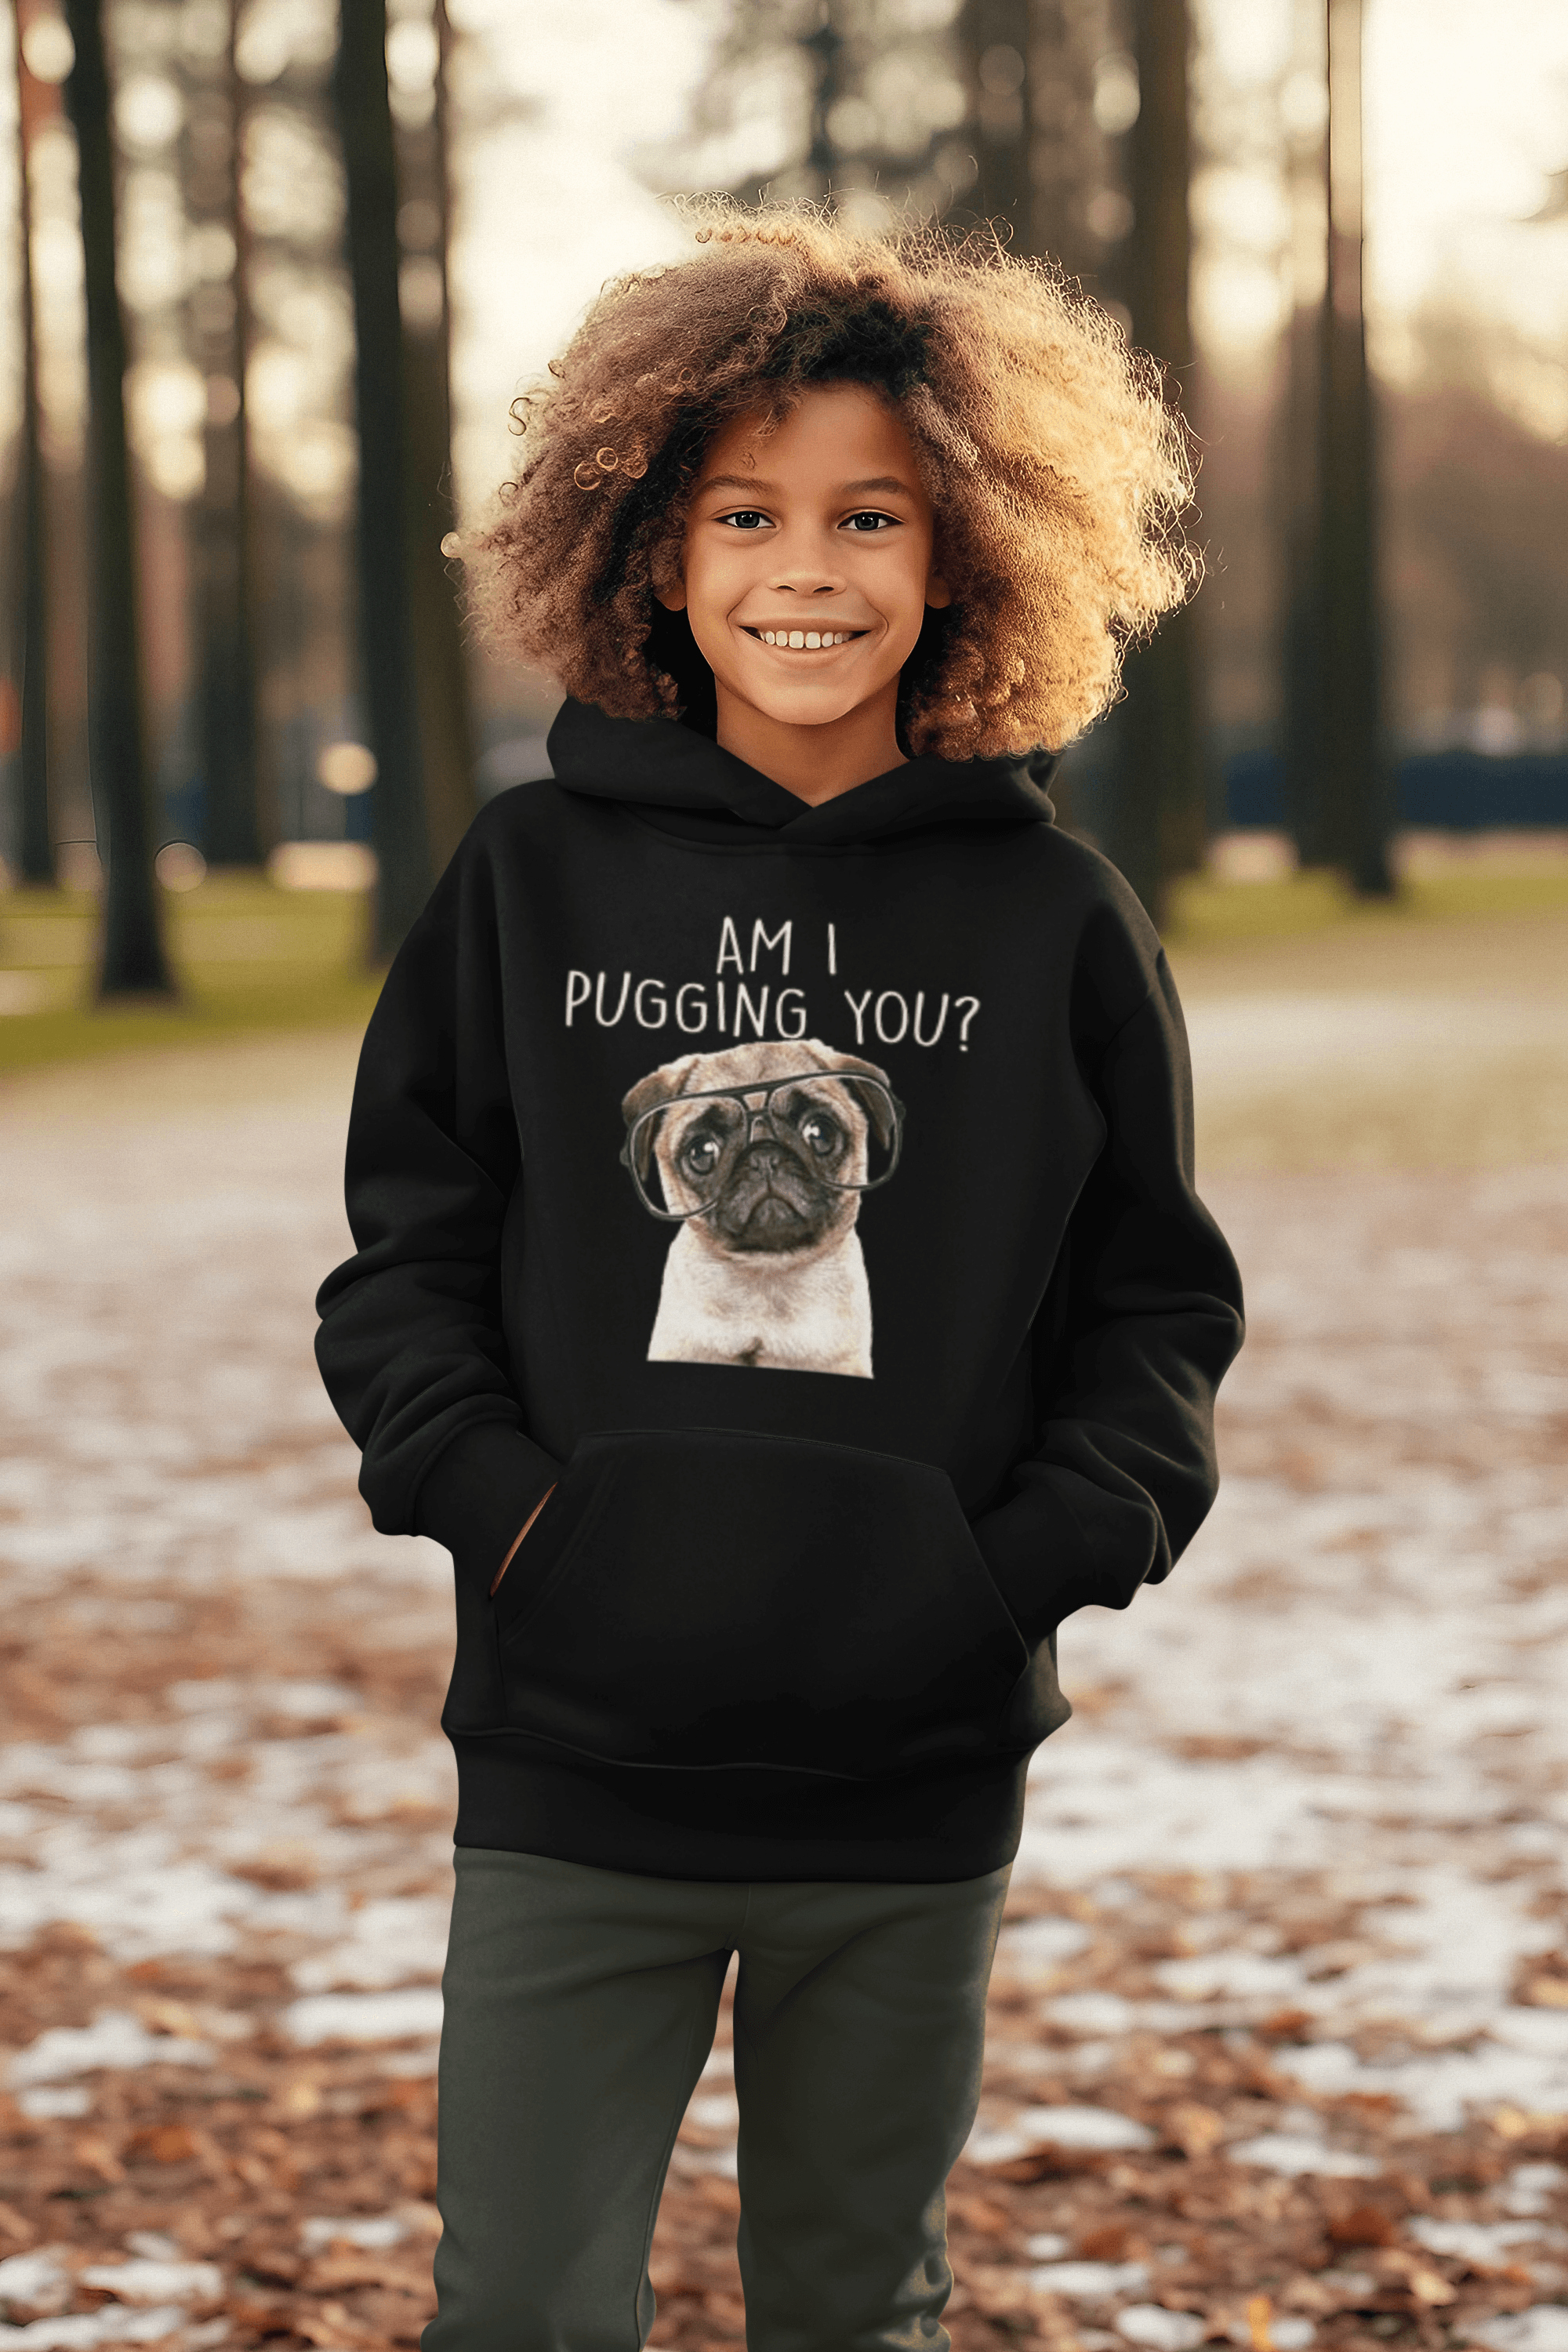 Pug Hoodie Am I Pugging You? Blended Cotton Midweight Unisex Pullover - TopKoalaTee